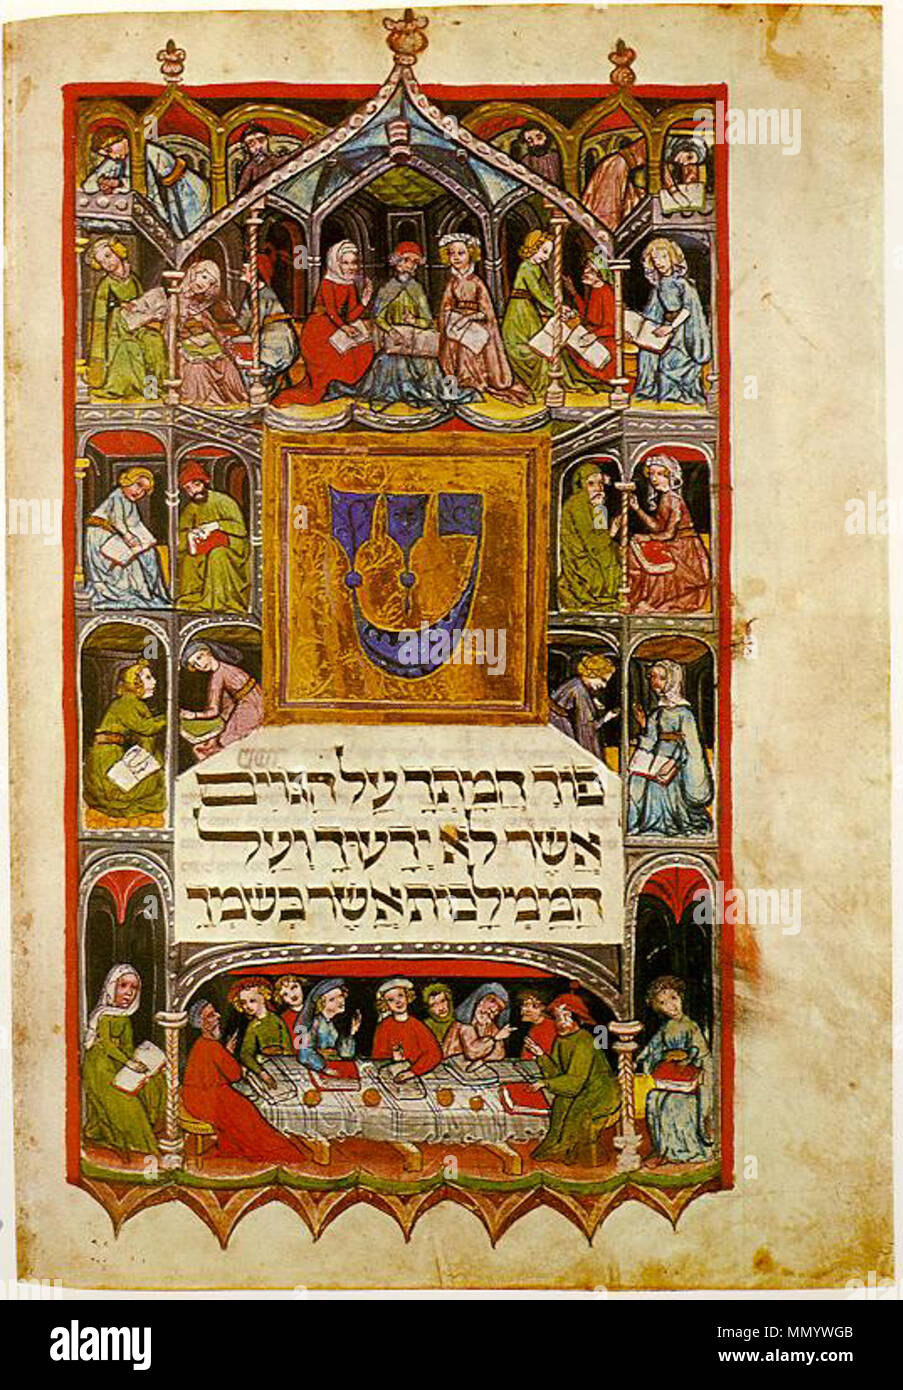 .  Deutsch: Darmstädter Haggadah English: An early 15th century manuscript copied around 1430 in square Ashkenazic script. Its decorations contain initial word panels, a few fully framed borders, and two full-page miniatures. The full-page miniature is the adaptation of medieval Christian iconography for the purposes of illustrating the importance of study and discussion in the celebration of the Passover Seder. Every figure (men and women) is holding a book, presumably a Haggadah, and is involved in discussing the Exodus from Egypt. The text on this page begins Psalm 79 verse 6. Original: Dar Stock Photo